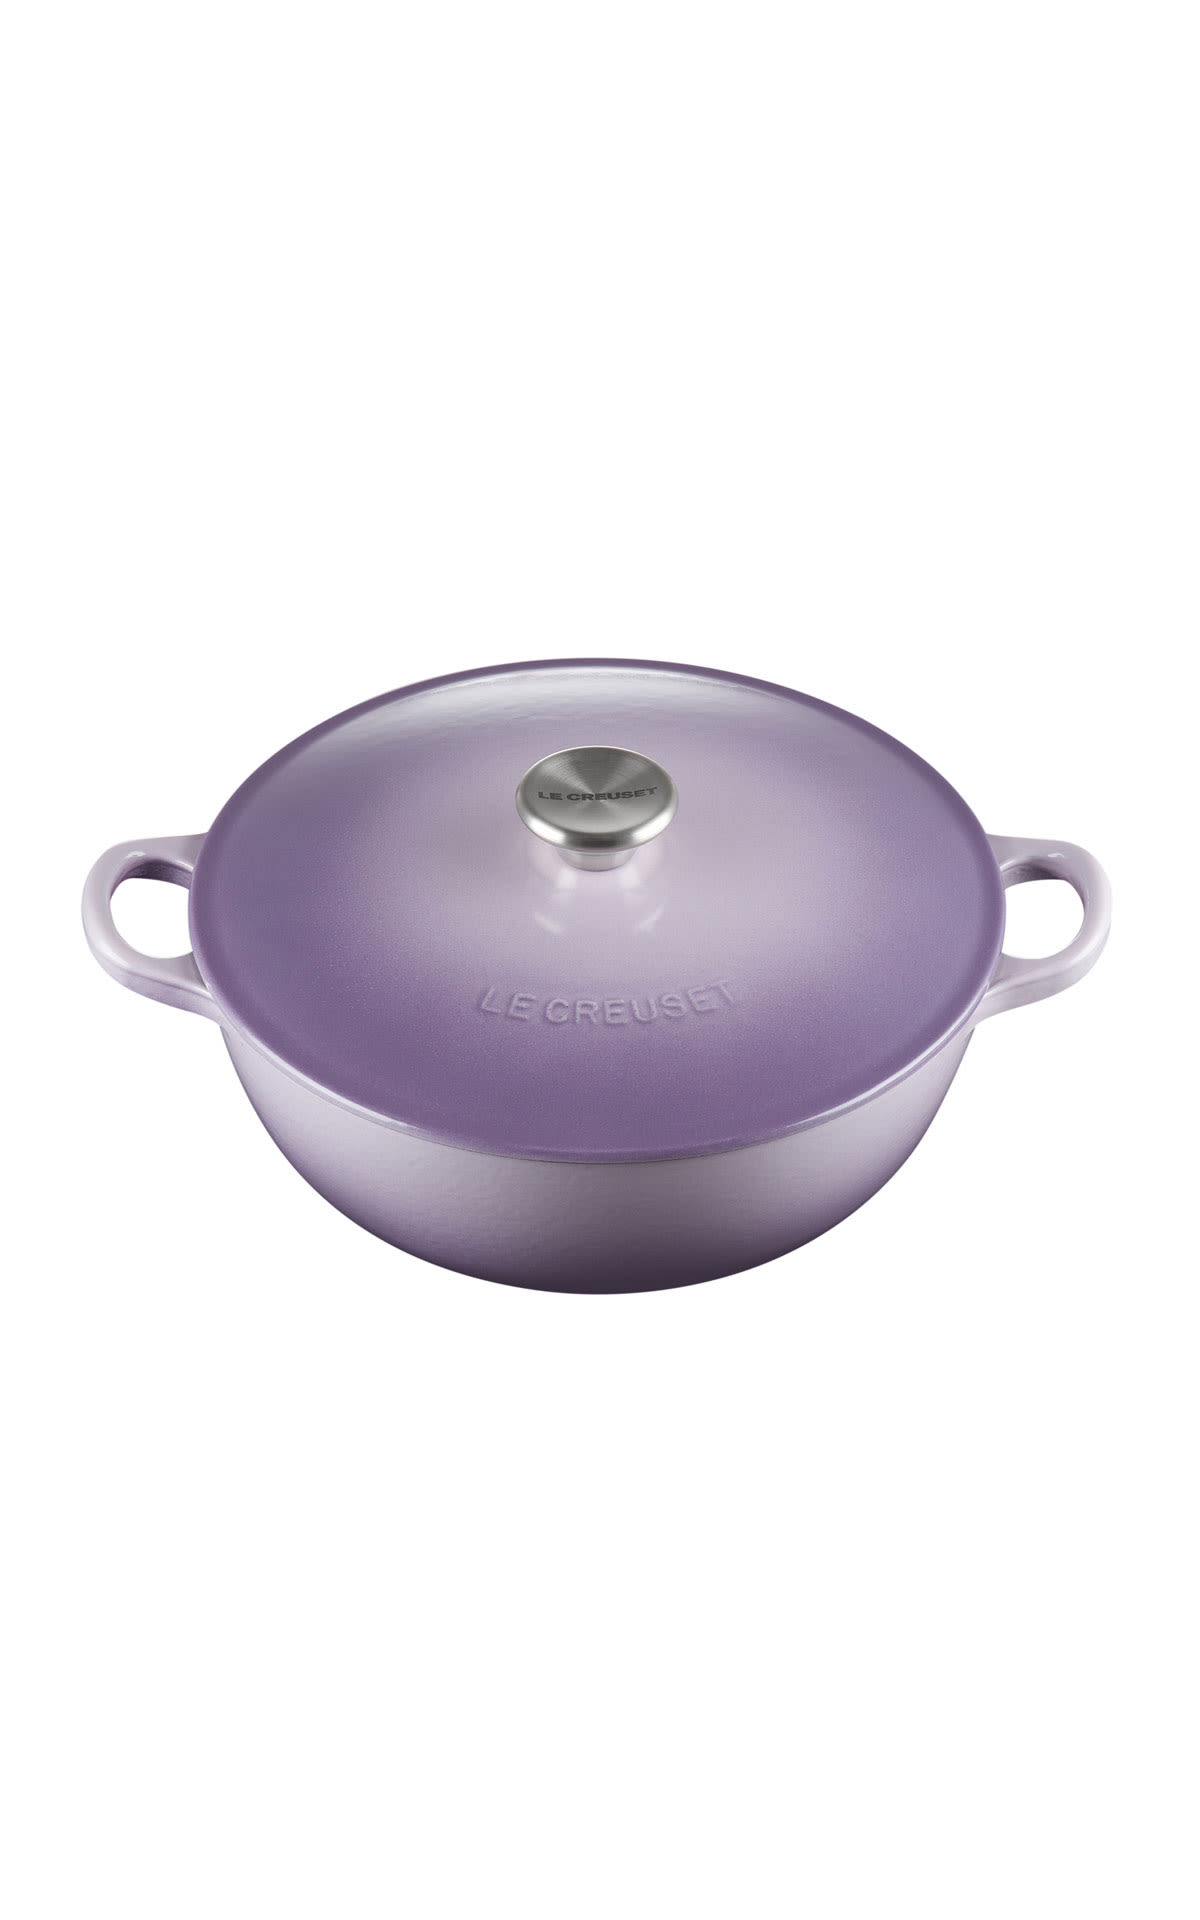 Le Creuset 24cm soup pot bluebell from Bicester Village